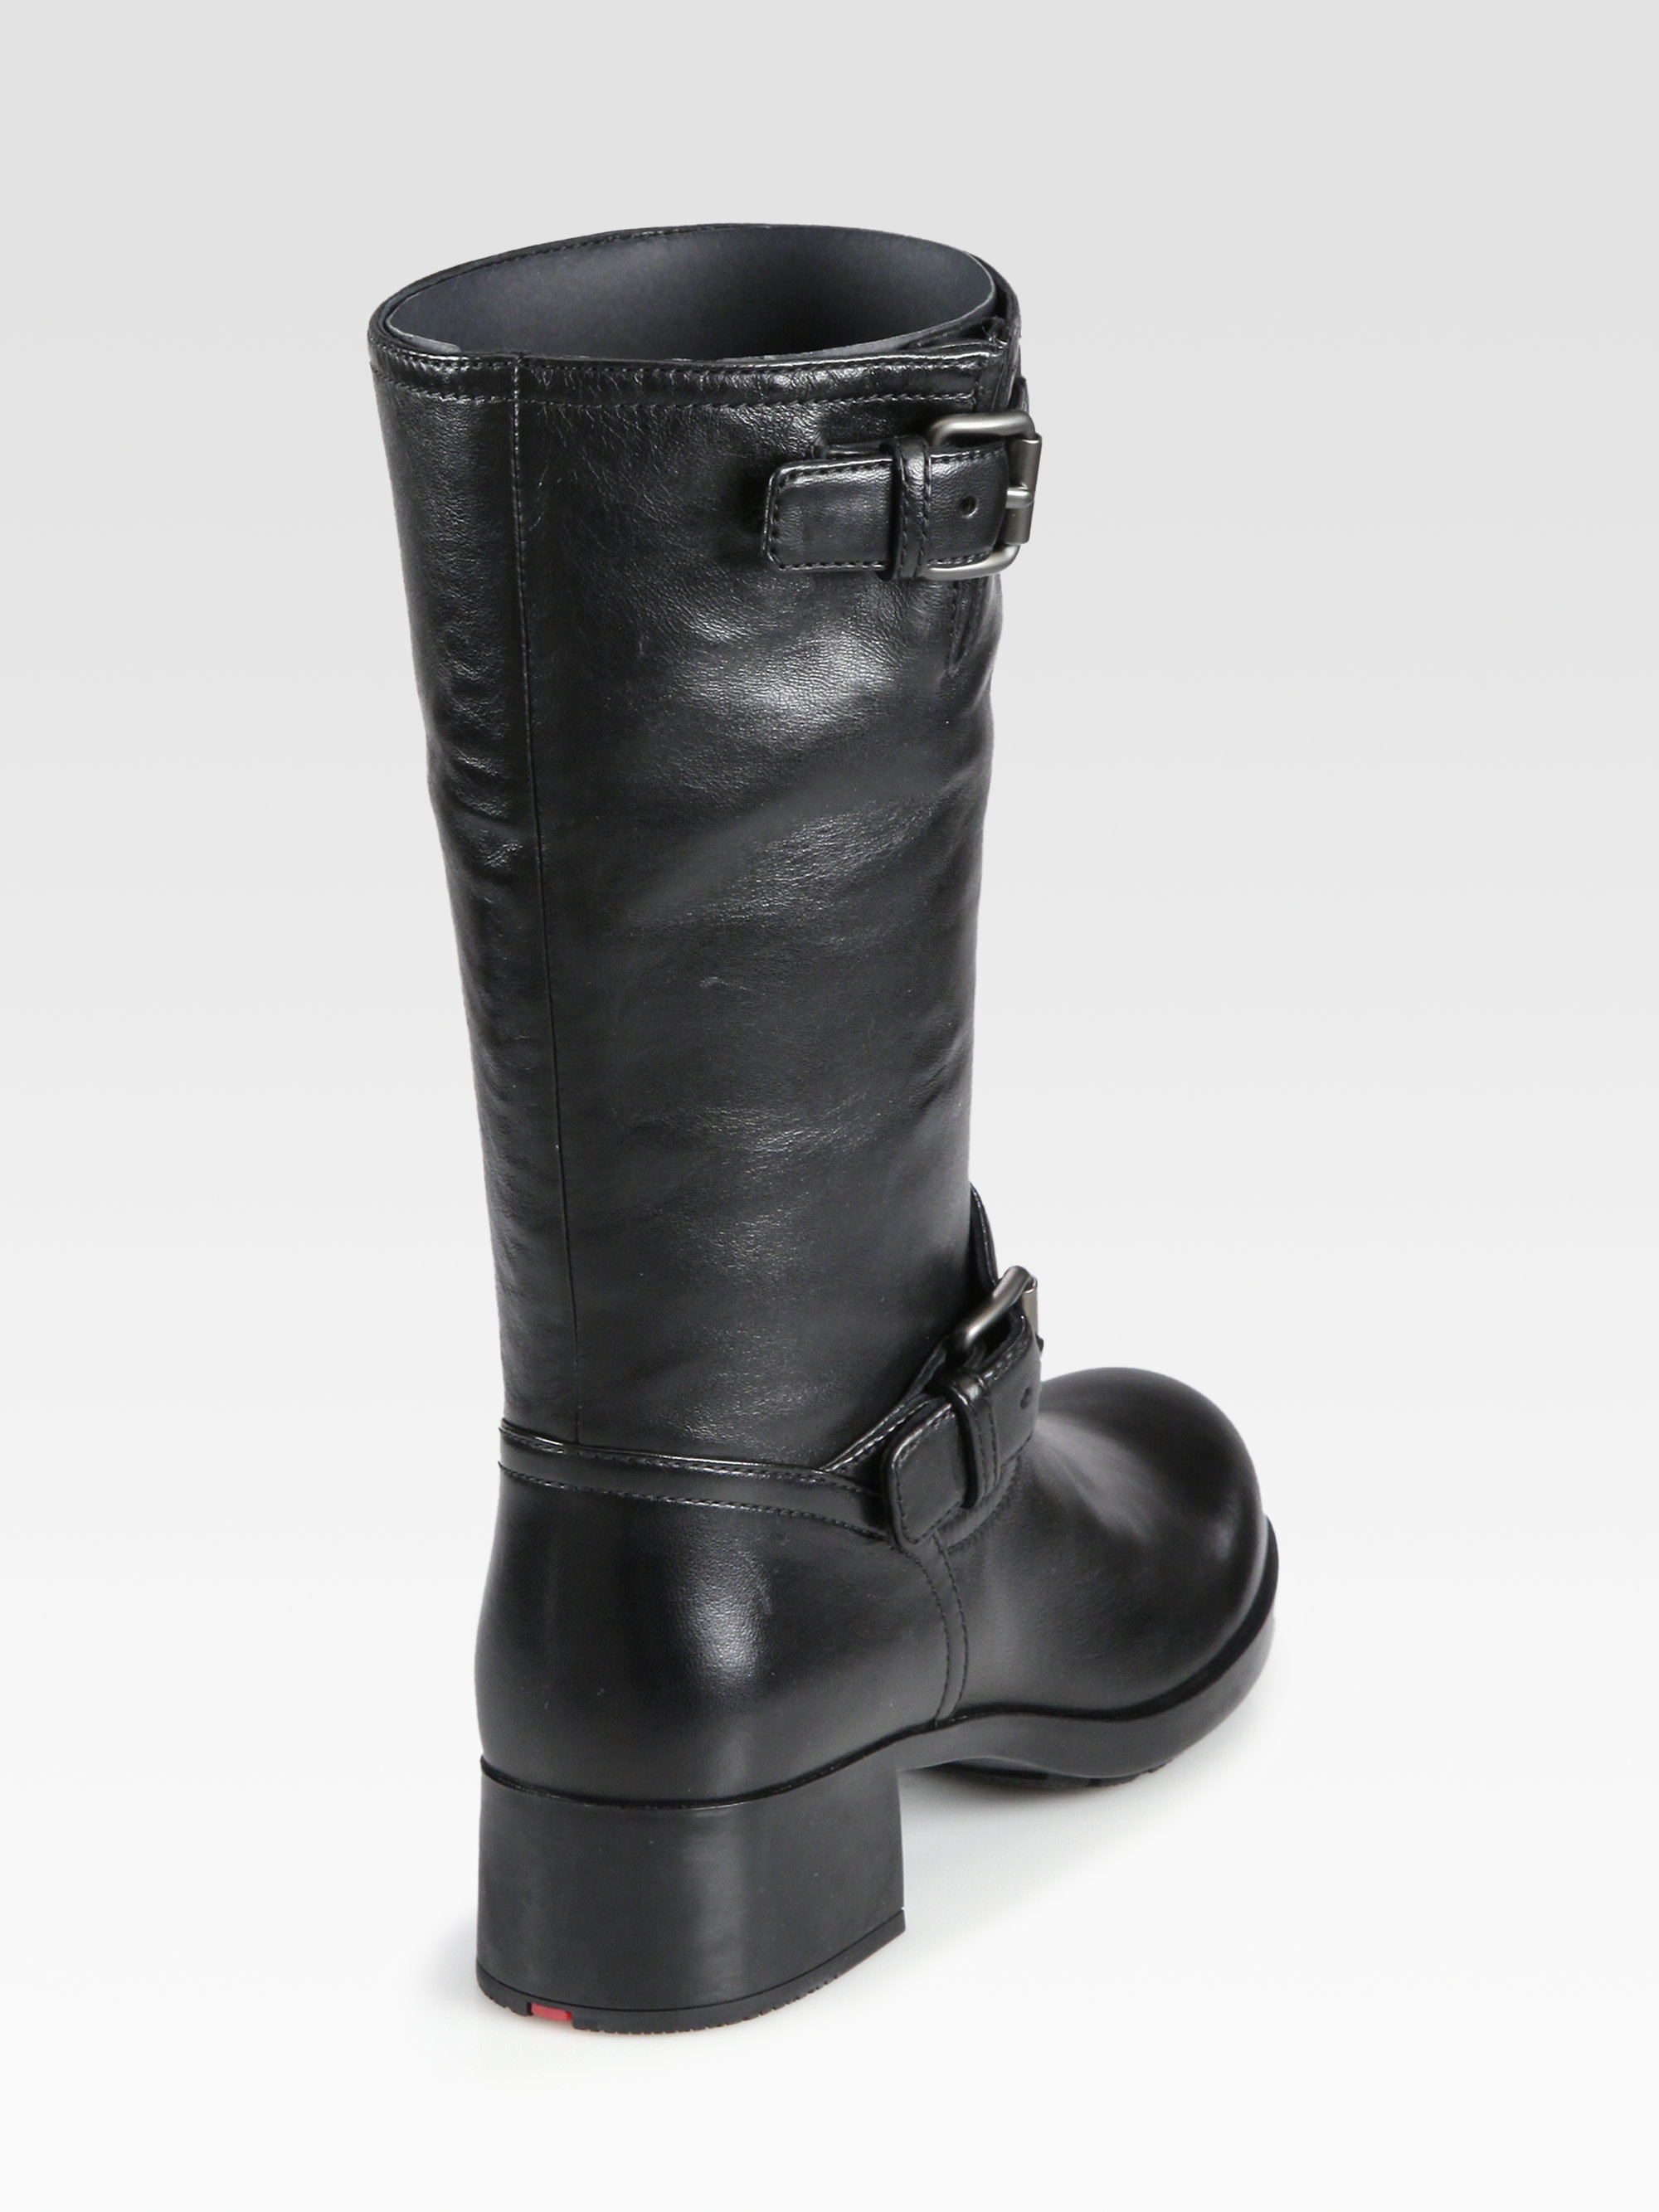 Prada Leather Motorcycle Boots in Black Lyst